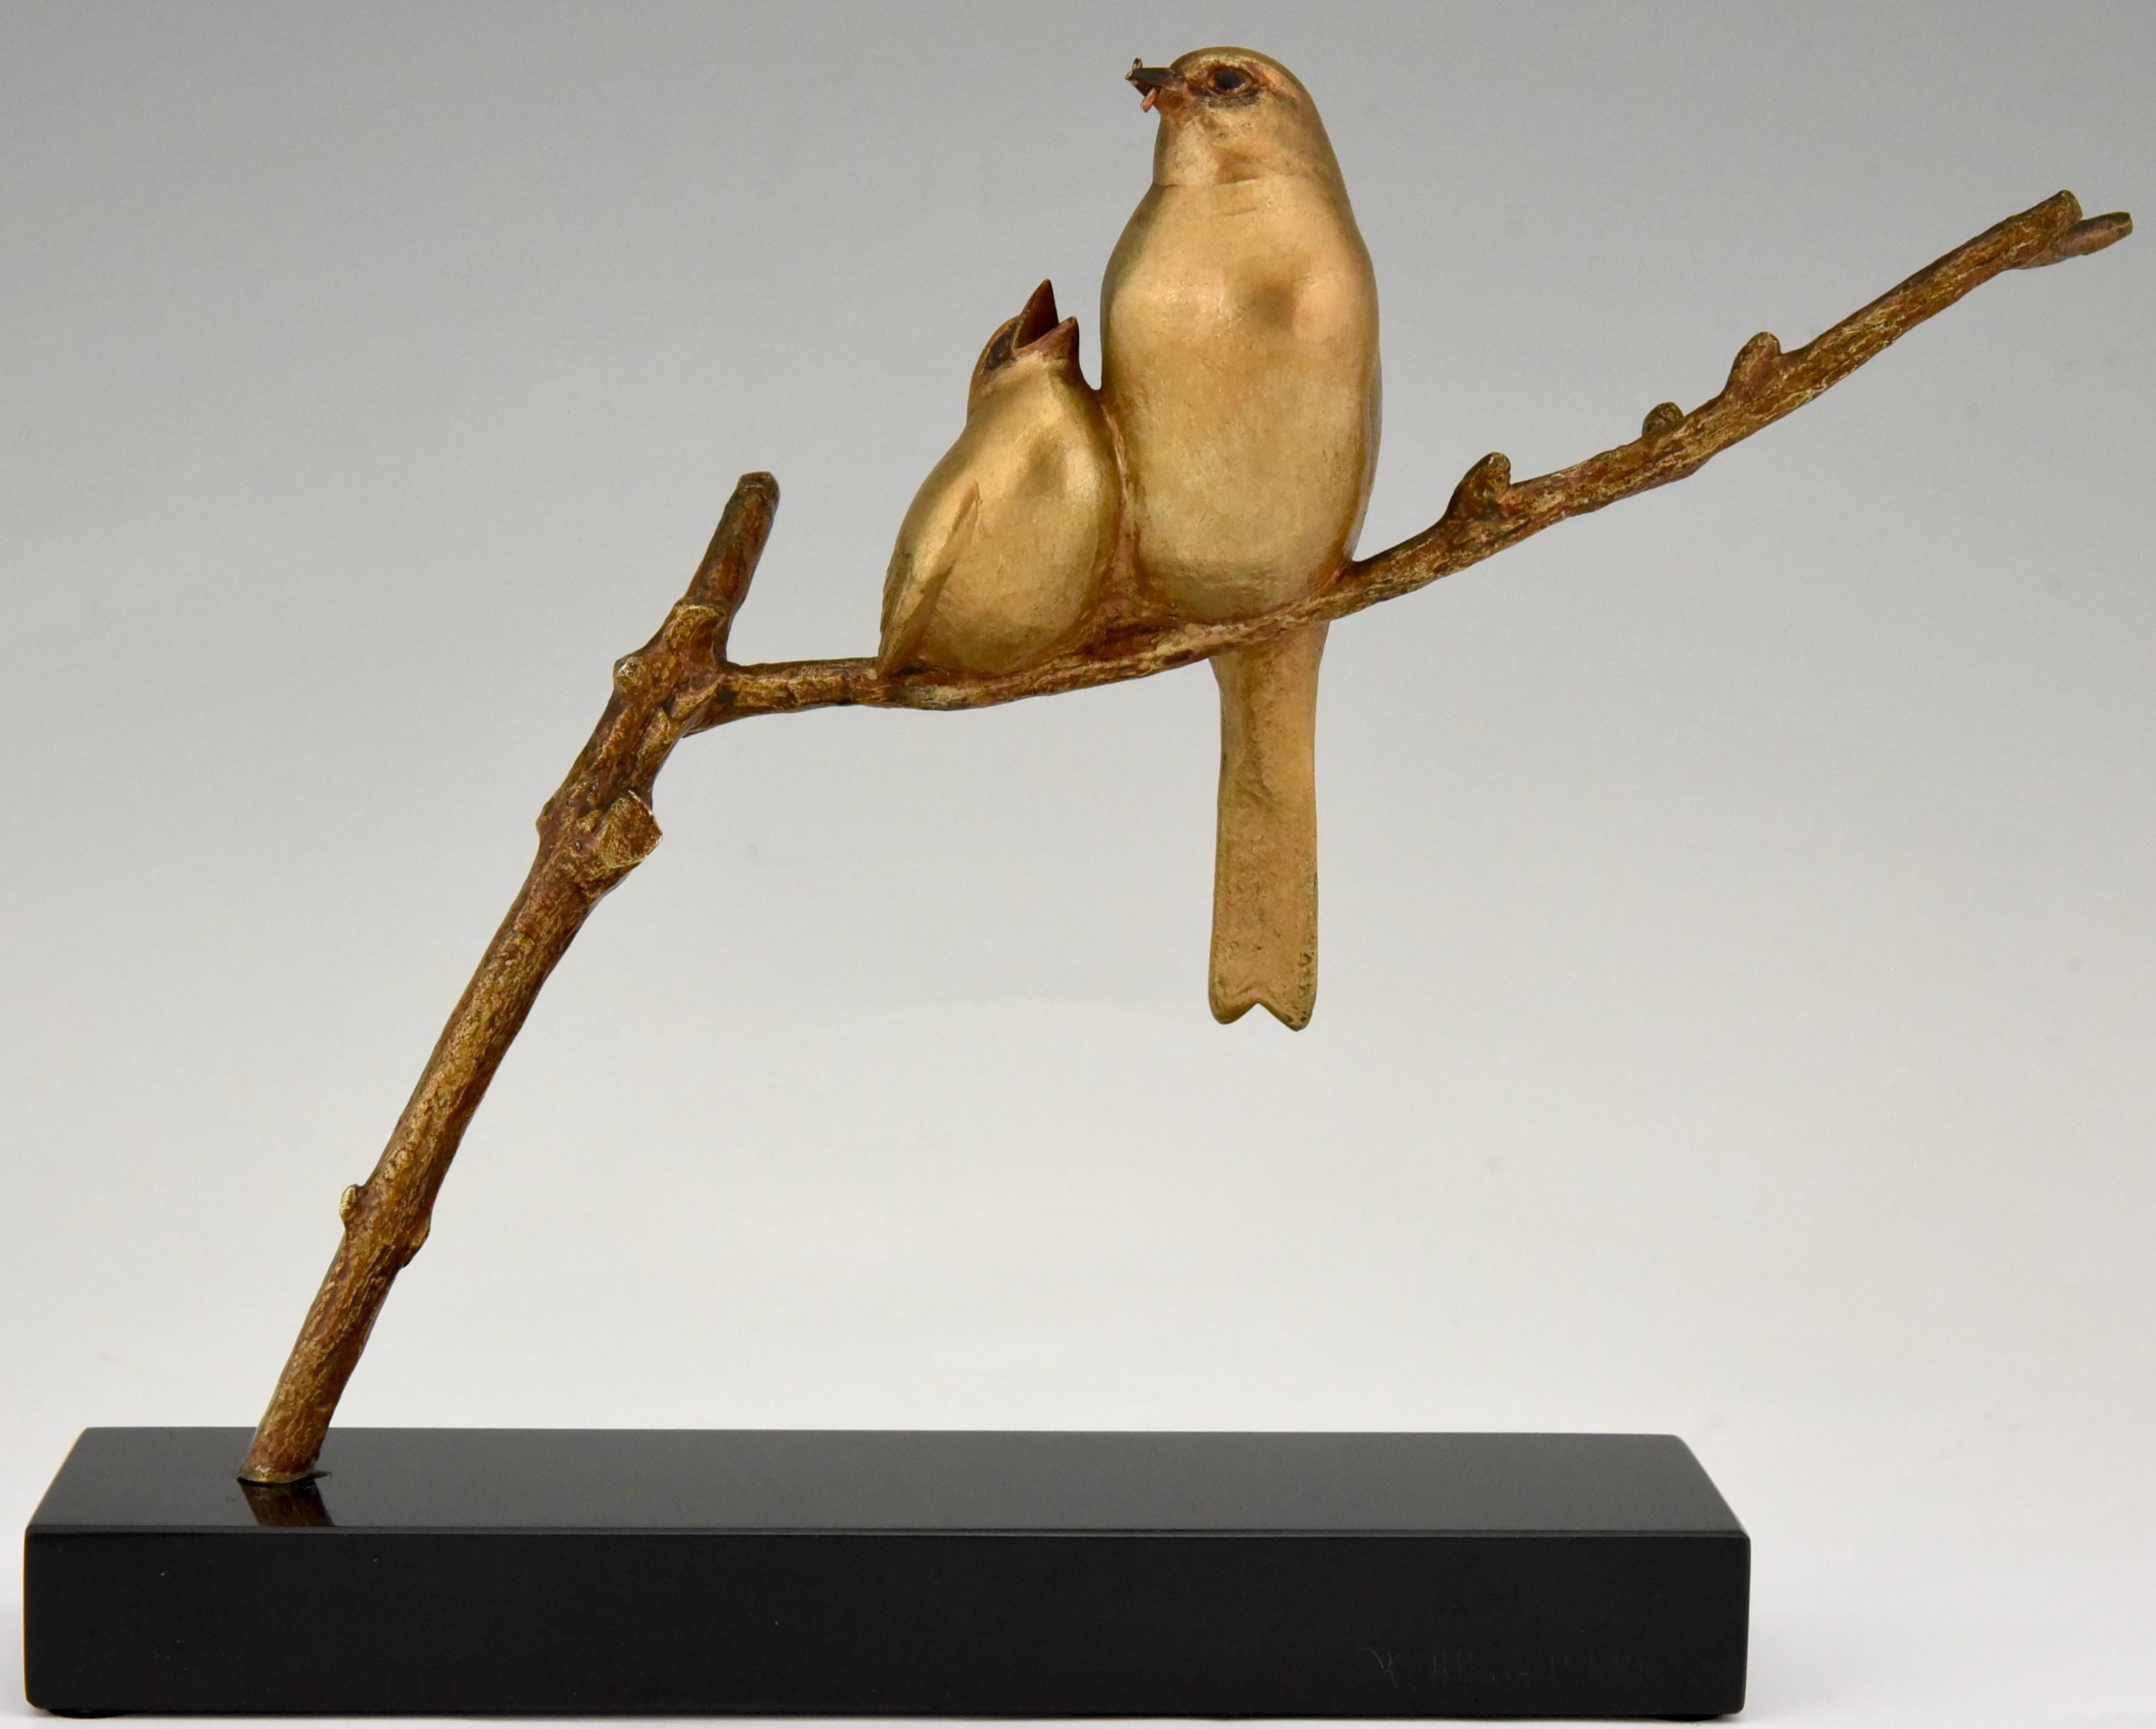 Art Deco bronze sculpture of a mother bird feeding her chick.
Both birds are sitting on a branch. The bronze has a golden patina and stands on a Belgian Black marble plinth. Signed by the famous artist Andre Vincent Becquerel, France,